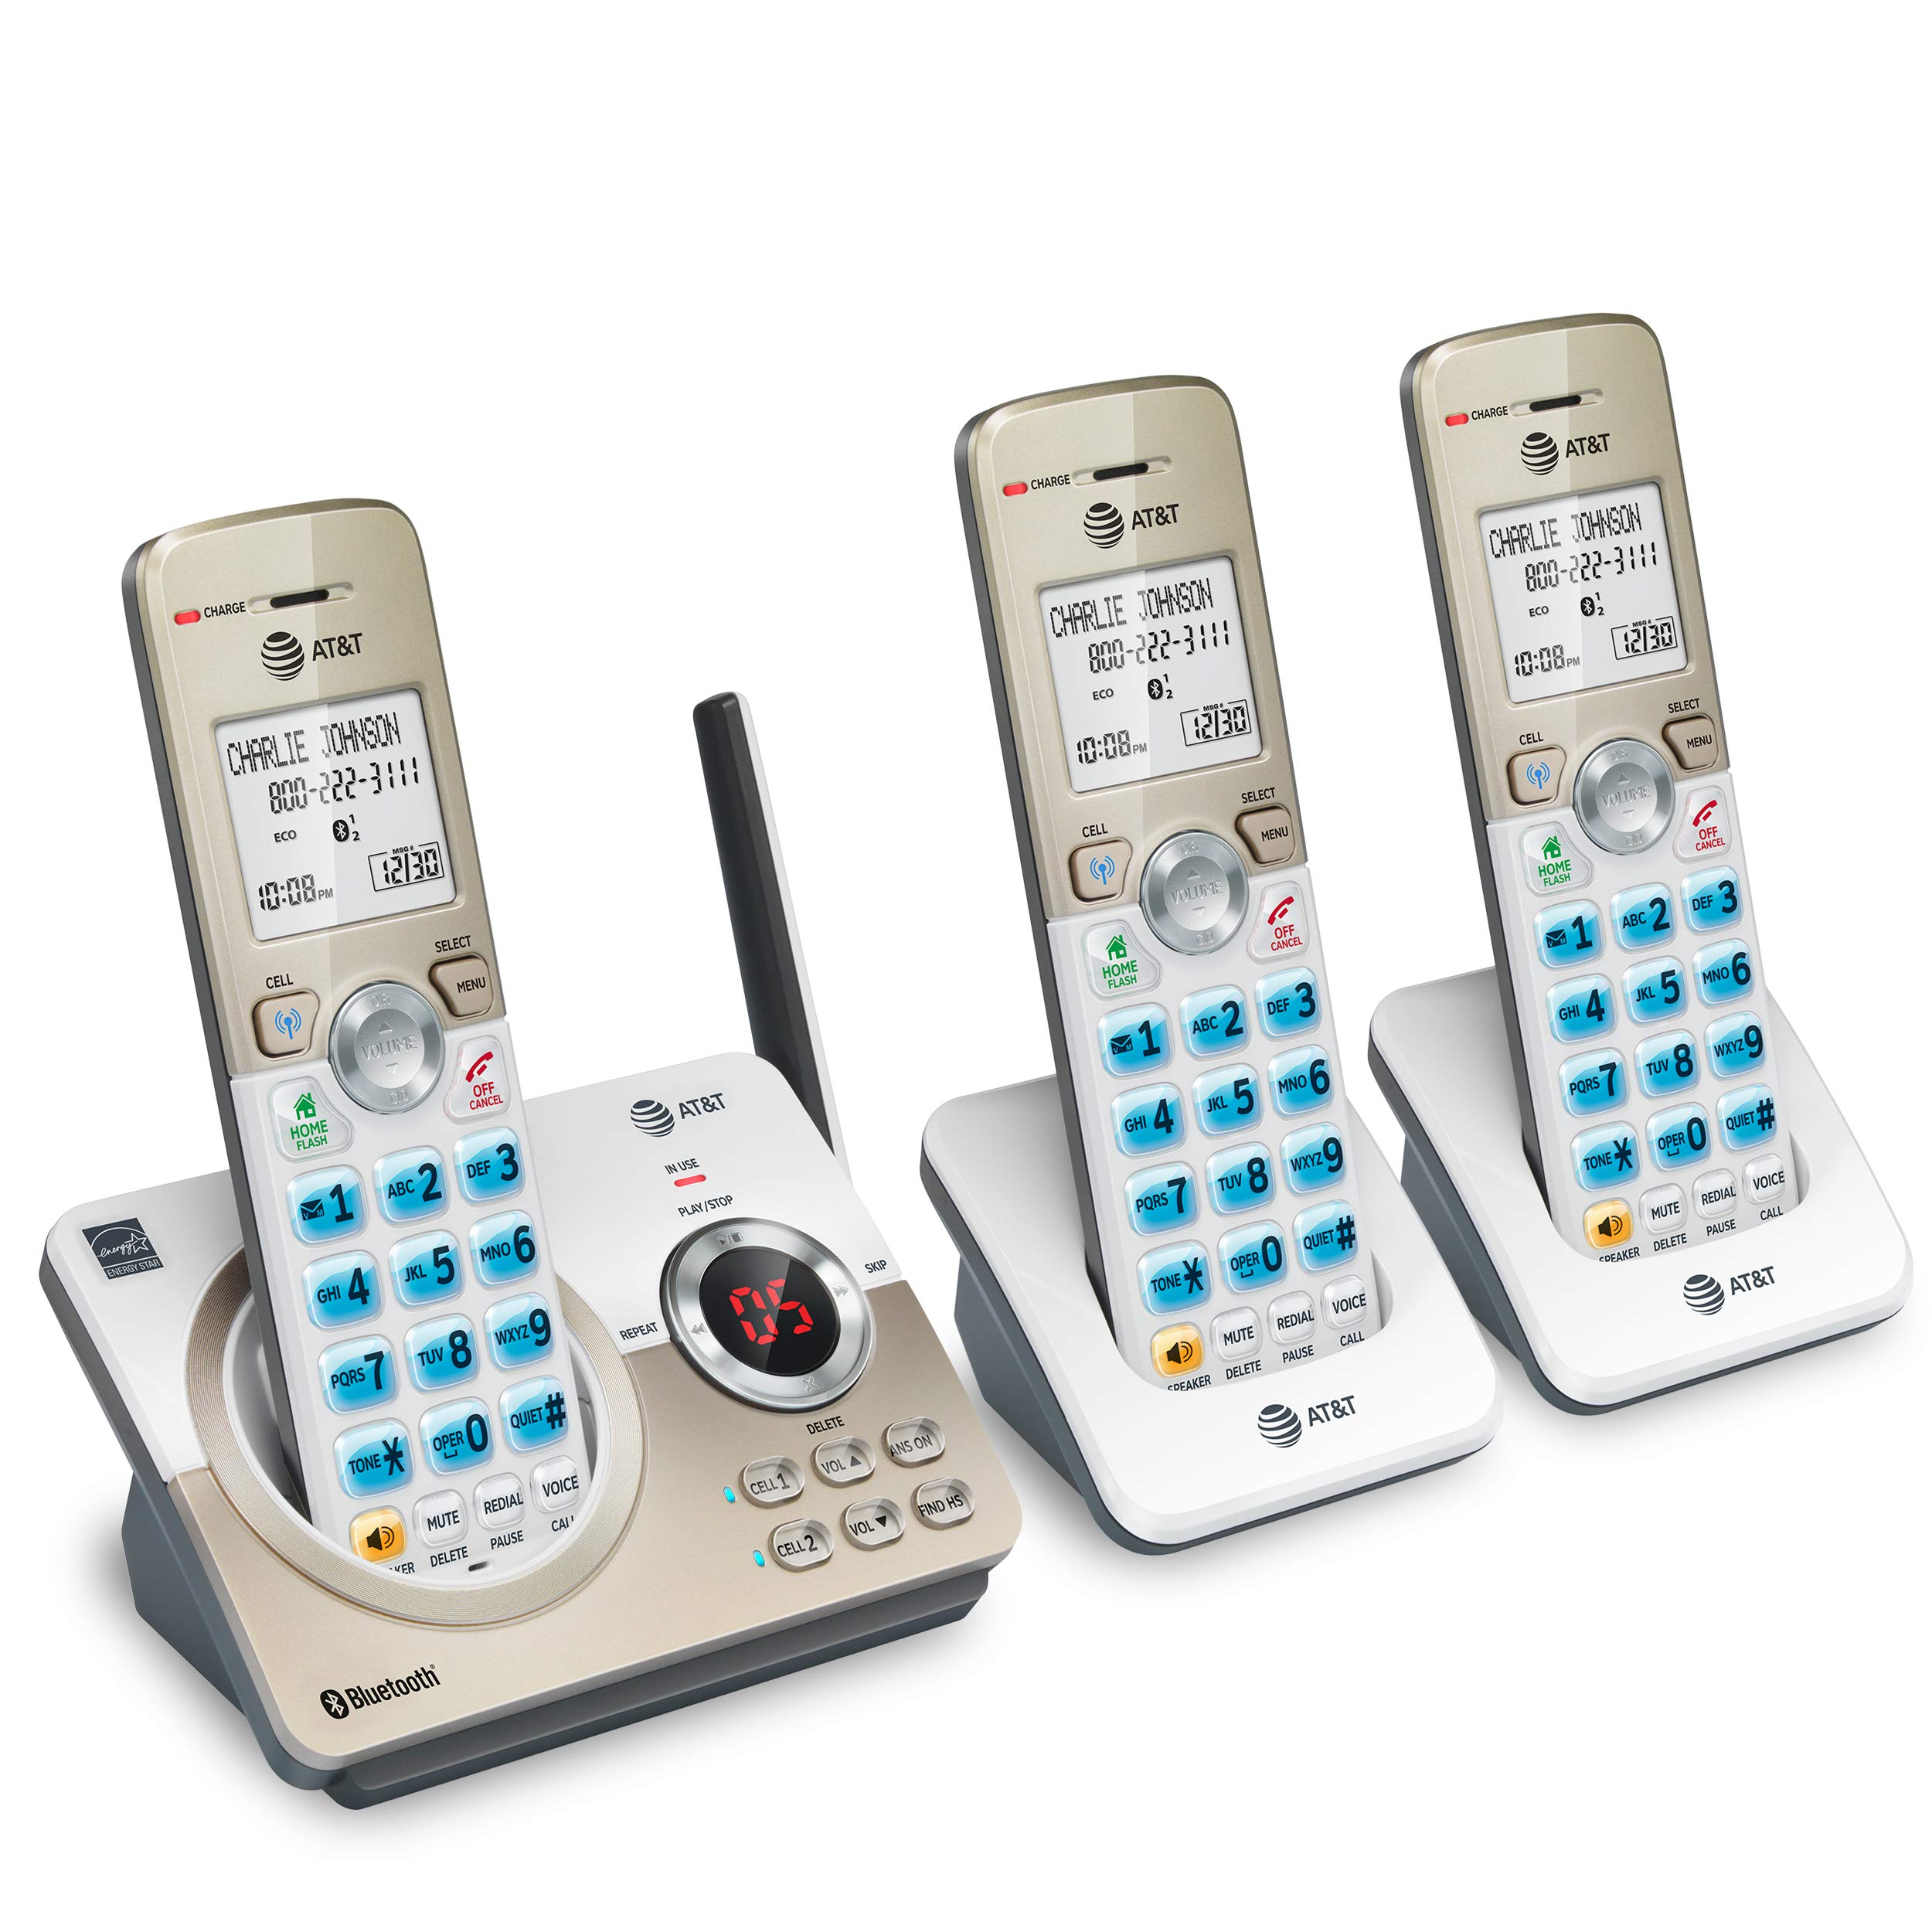 AT&T DL72319 DECT 6.0 3-Handset Cordless Phone for Home with Connect to Cell, Call Blocking, 1.8